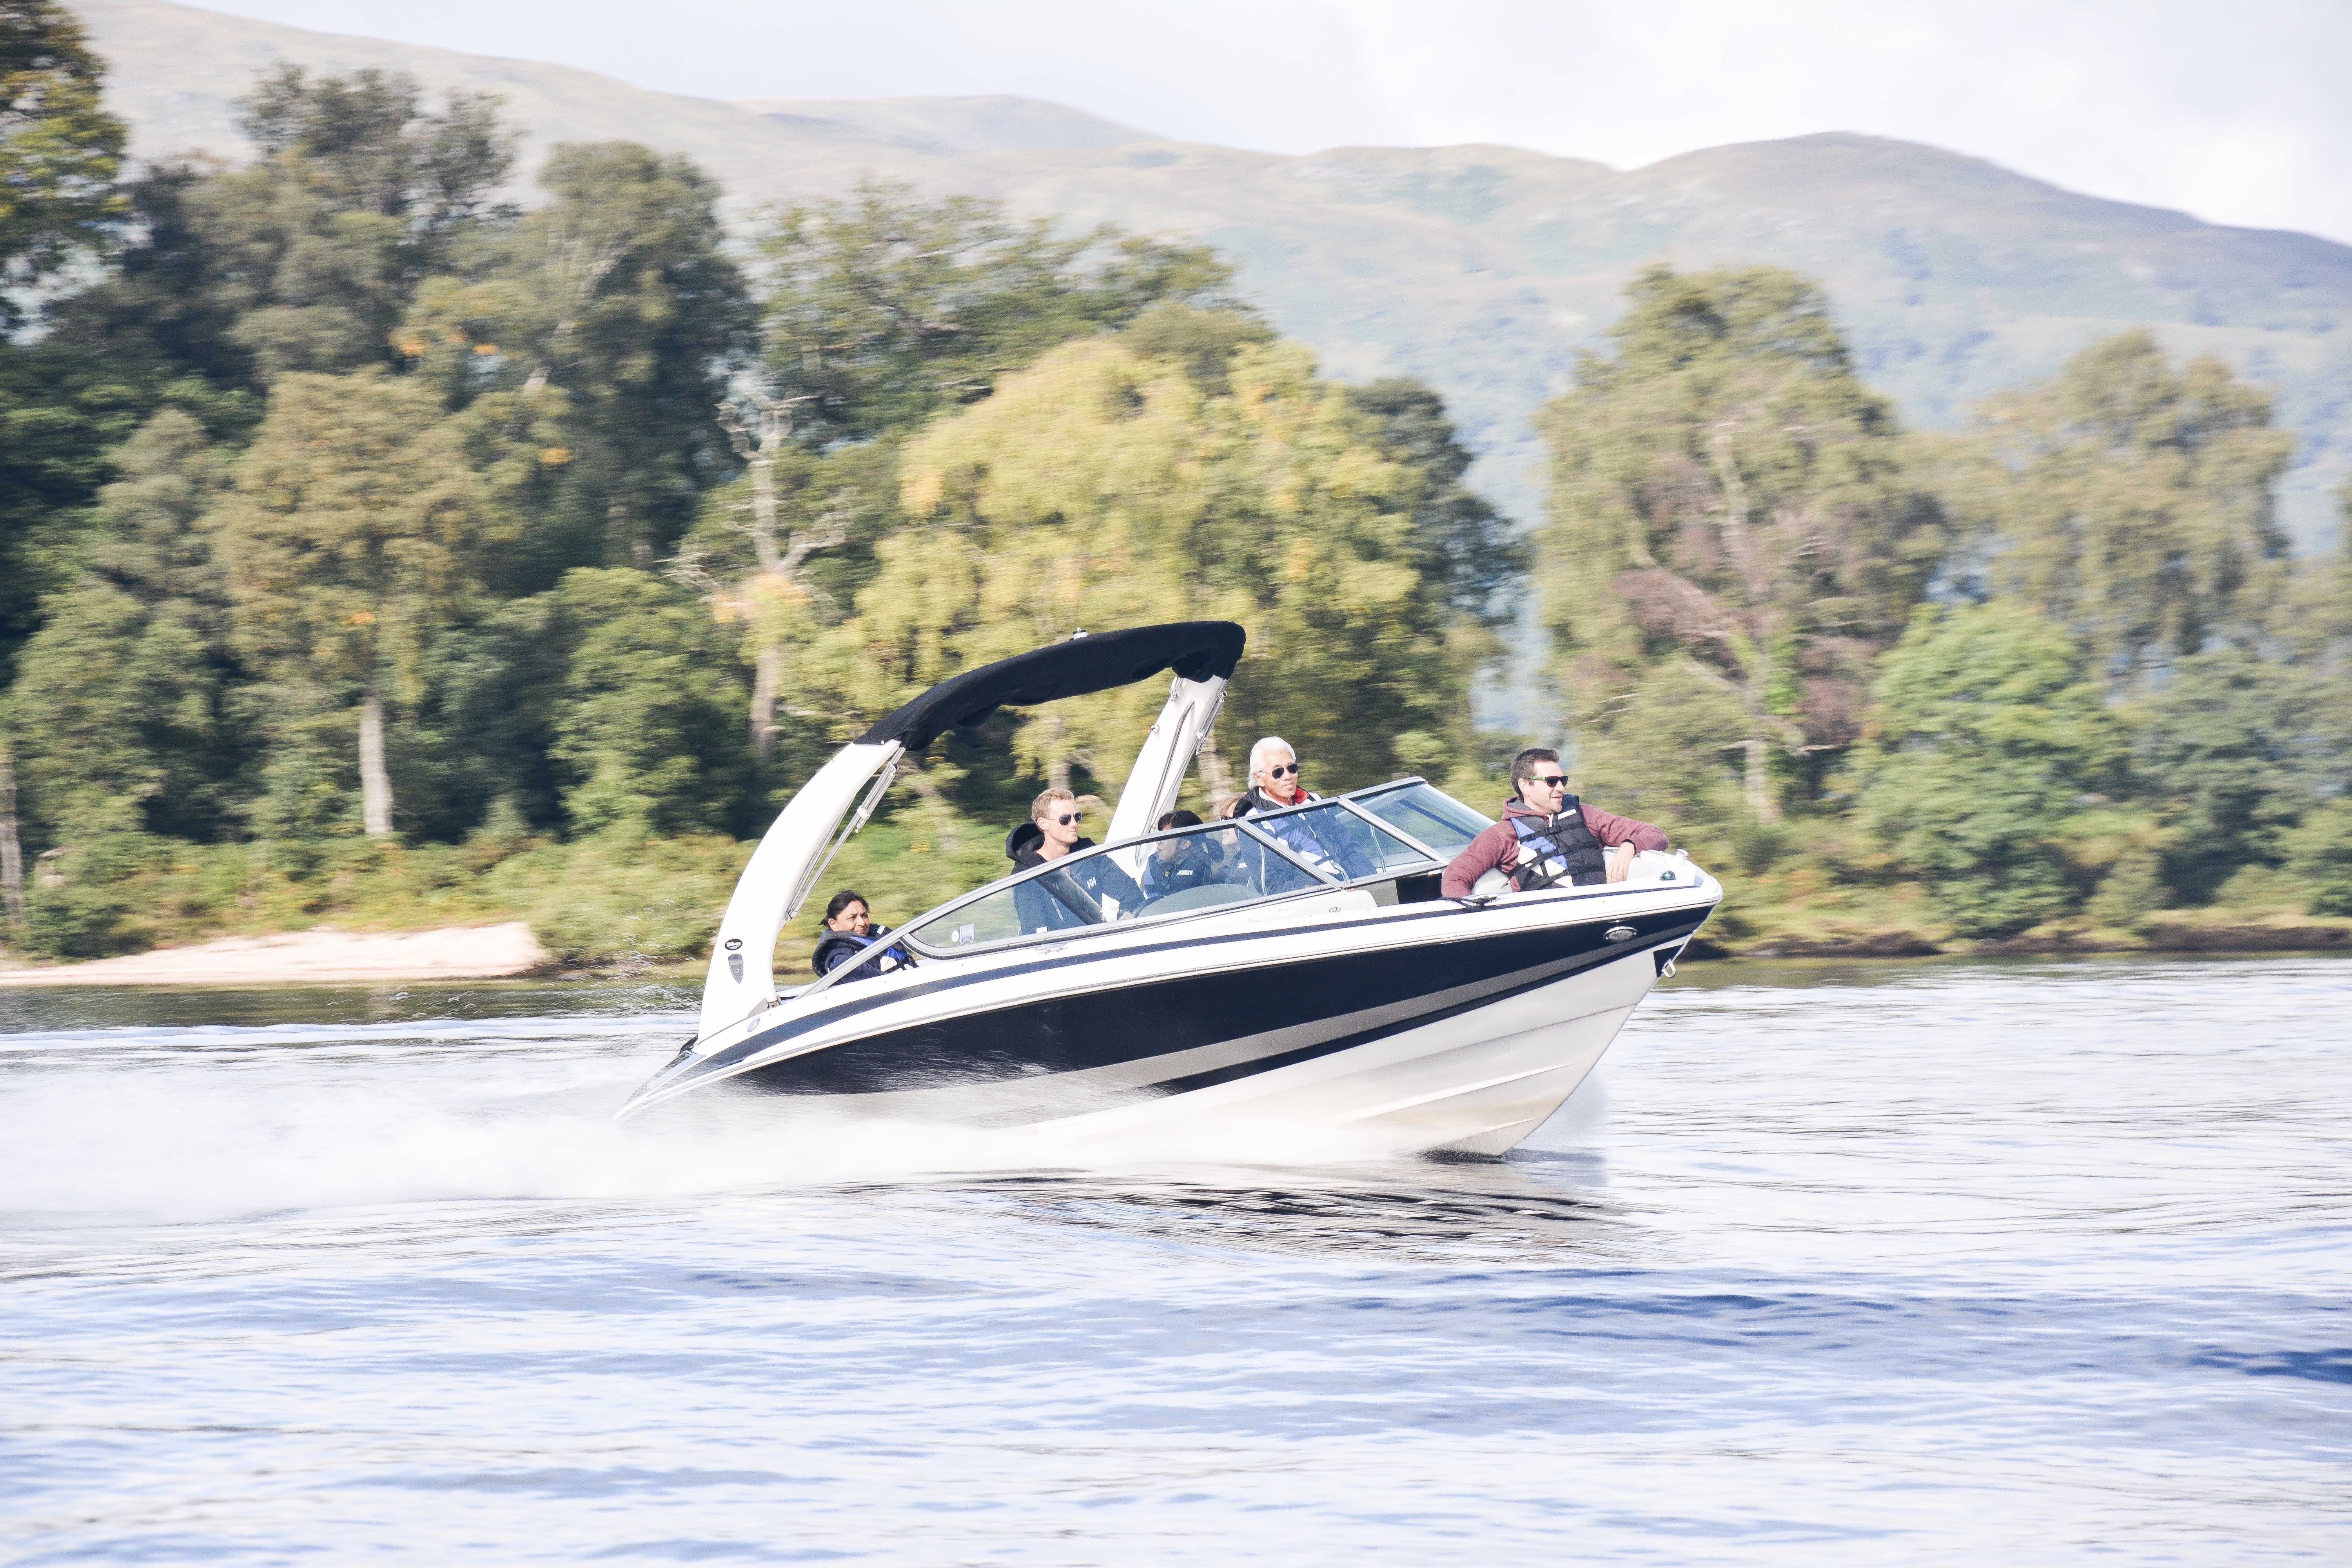 Speedboat Tours and other activities at Portnellan Farm, Loch Lomond